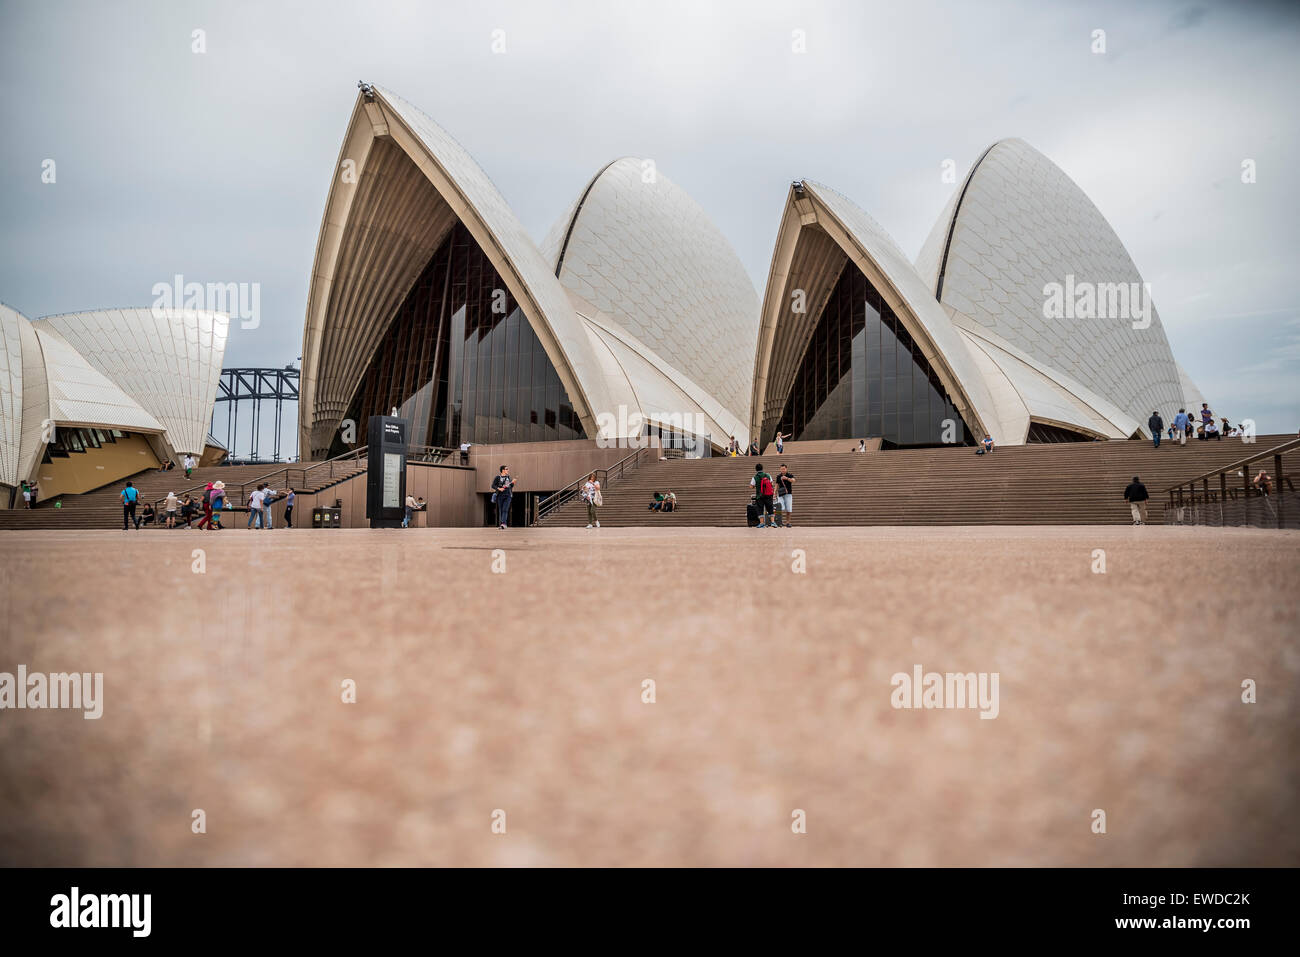 details of the sail design of Sydney's Opera House Stock Photo